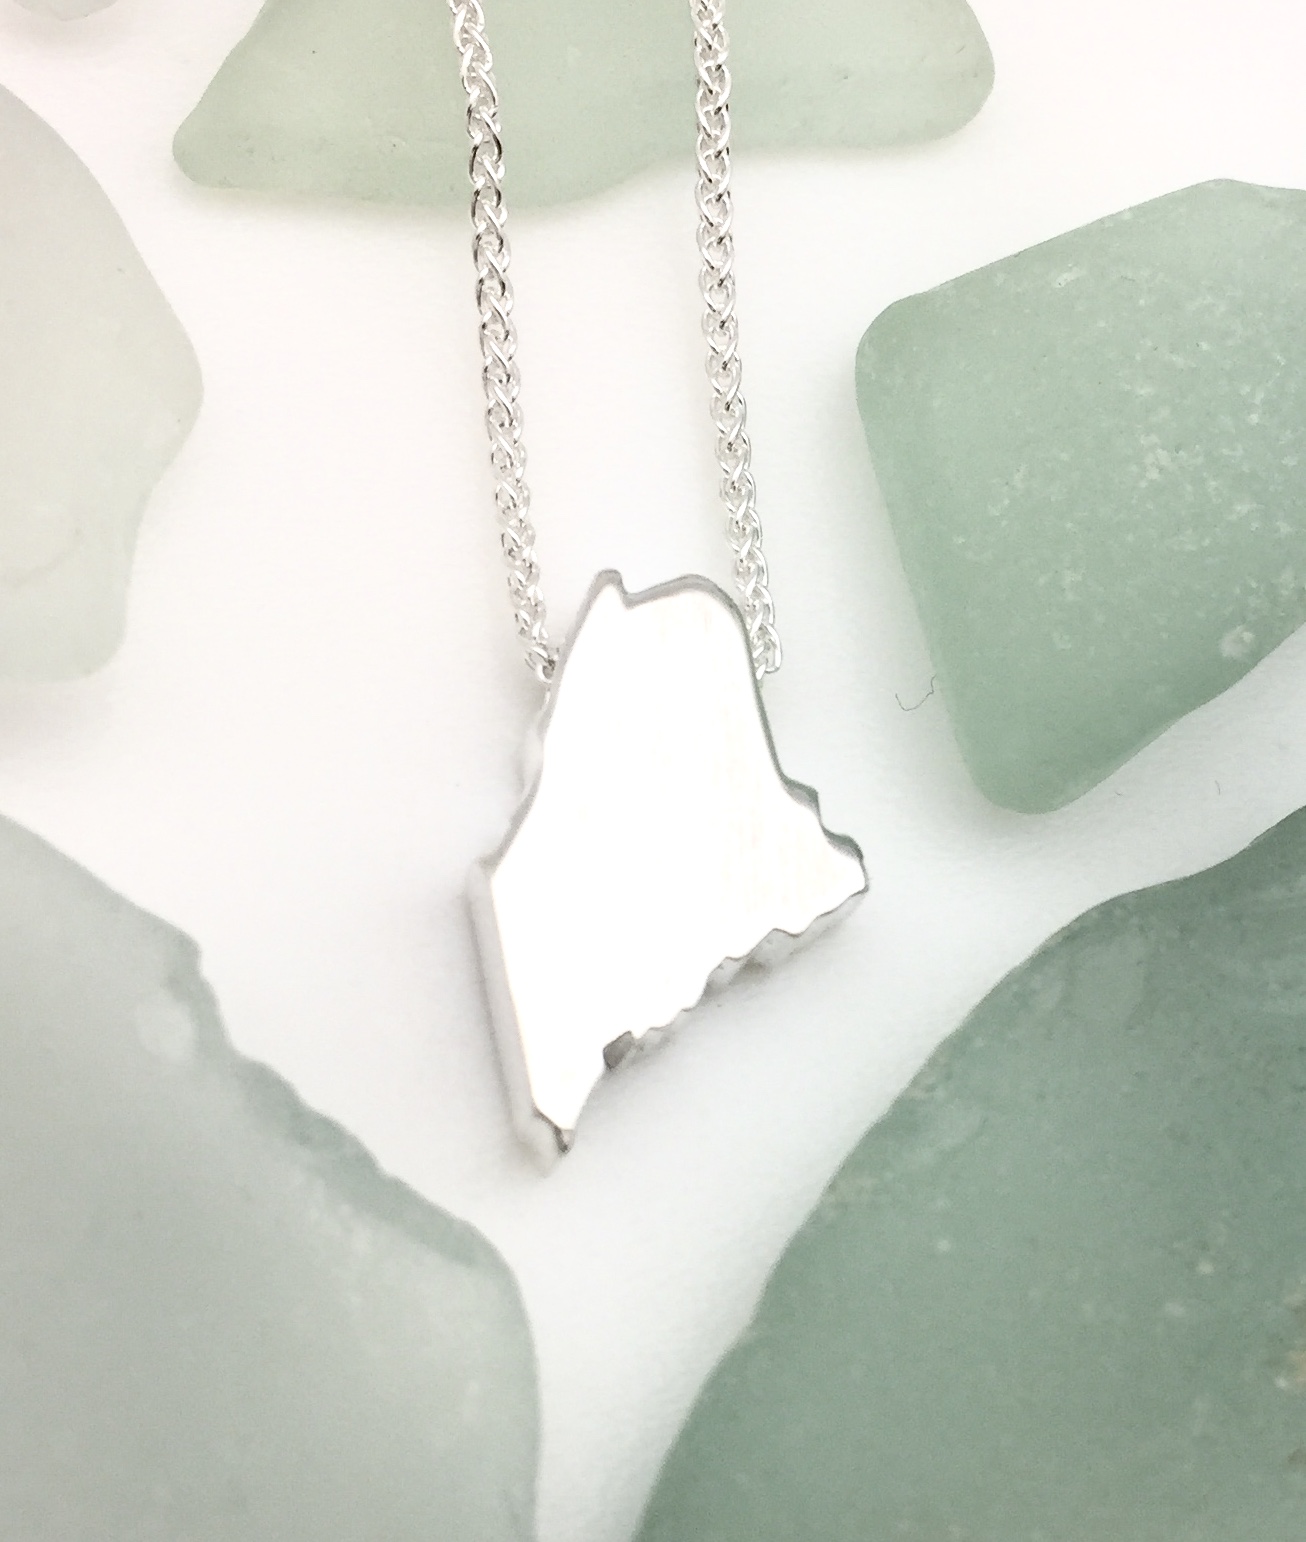 Details about  / New Polished Rhodium Plated 925 Sterling Silver Maine State Map Charm Pendant